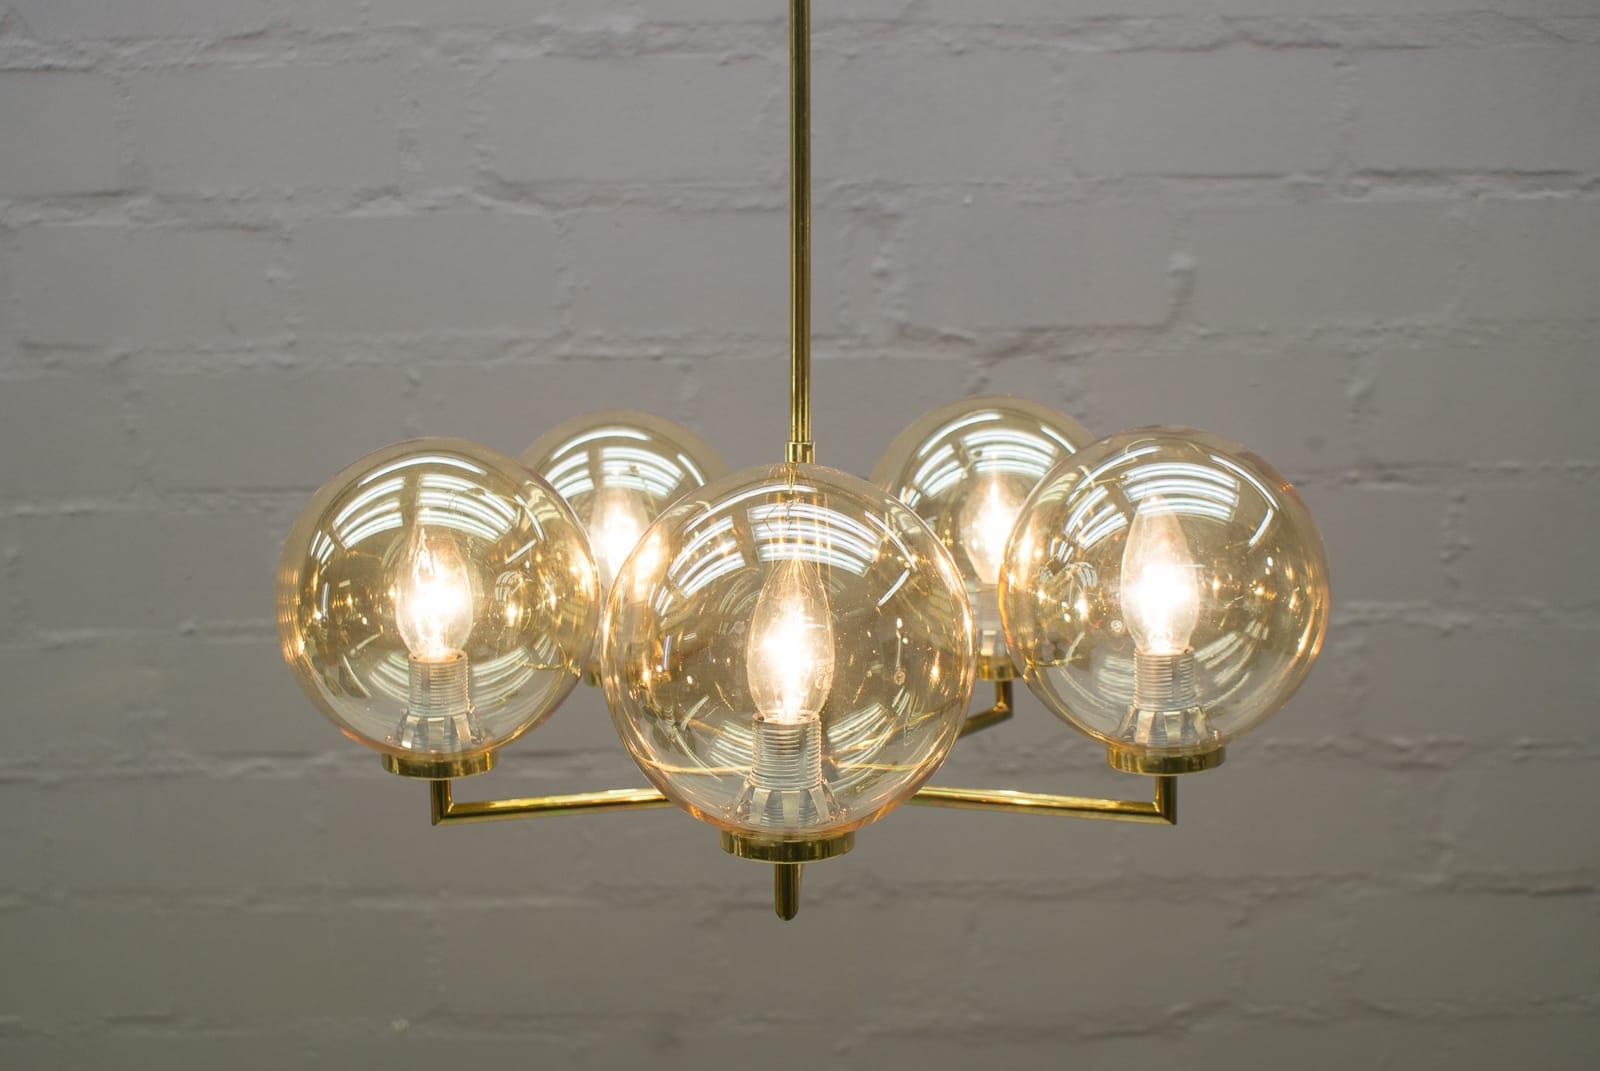 Scandinavian Space Age Orbit Ceiling Lamp with Five Amber Glass Balls, 1960s For Sale